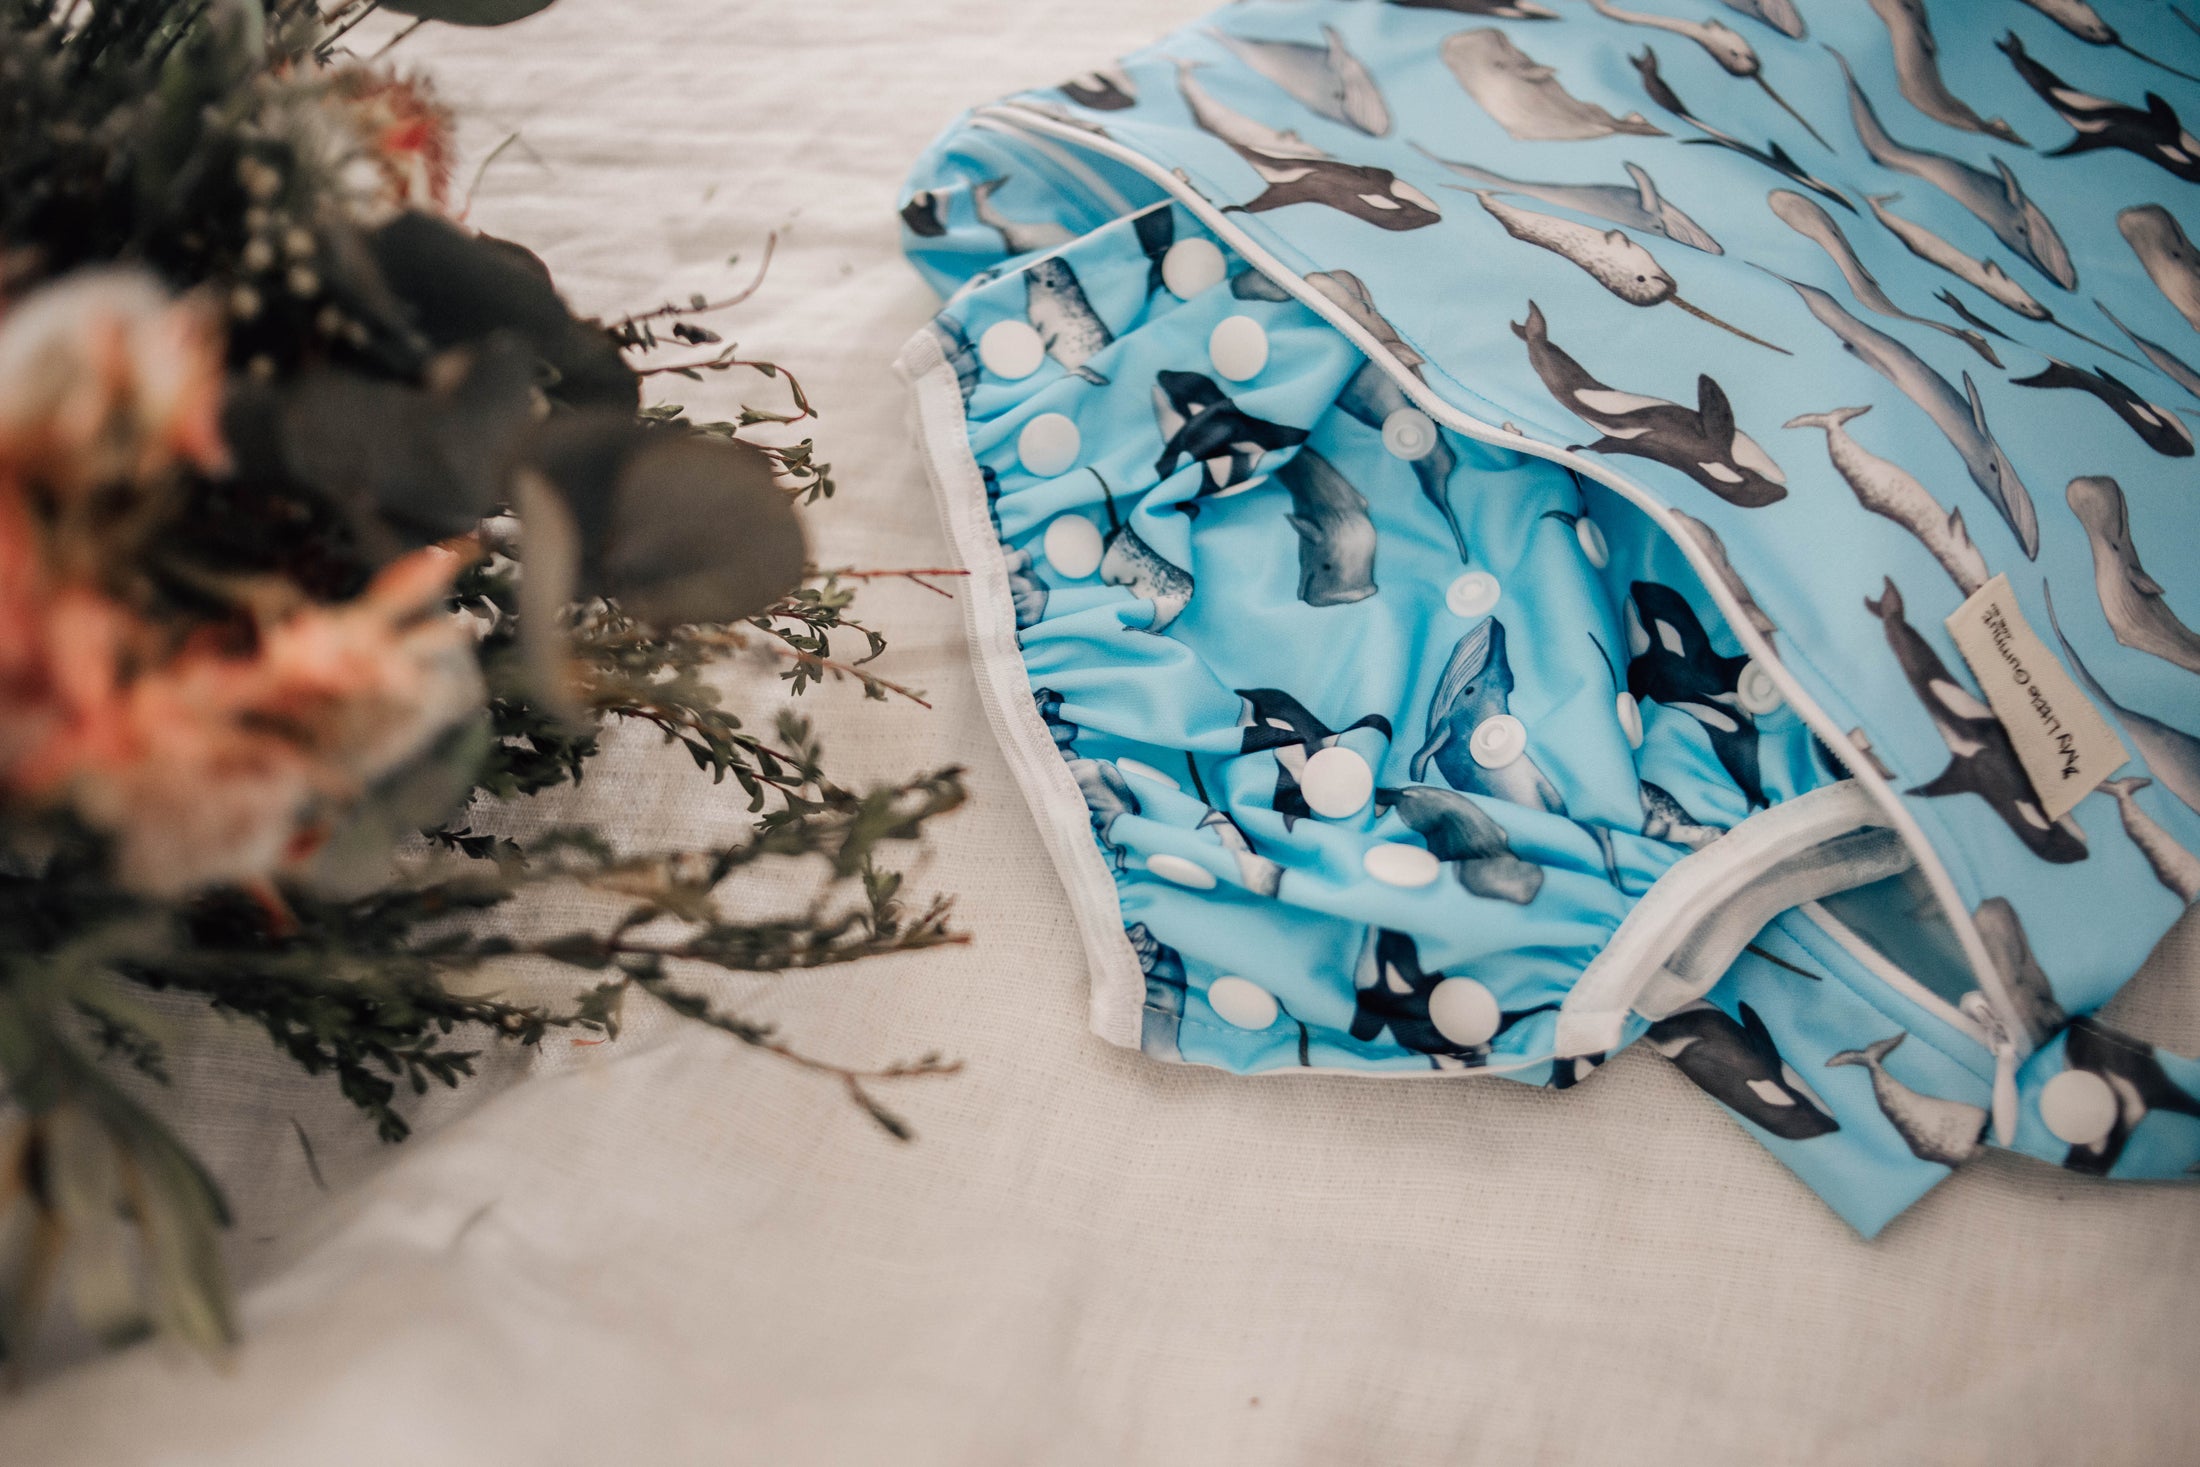 Whales cloth swimming nappy. Reusable swimming nappy. Australian artist design cloth nappy. My little gumnut.  Swim nappy and wet bag bundle.